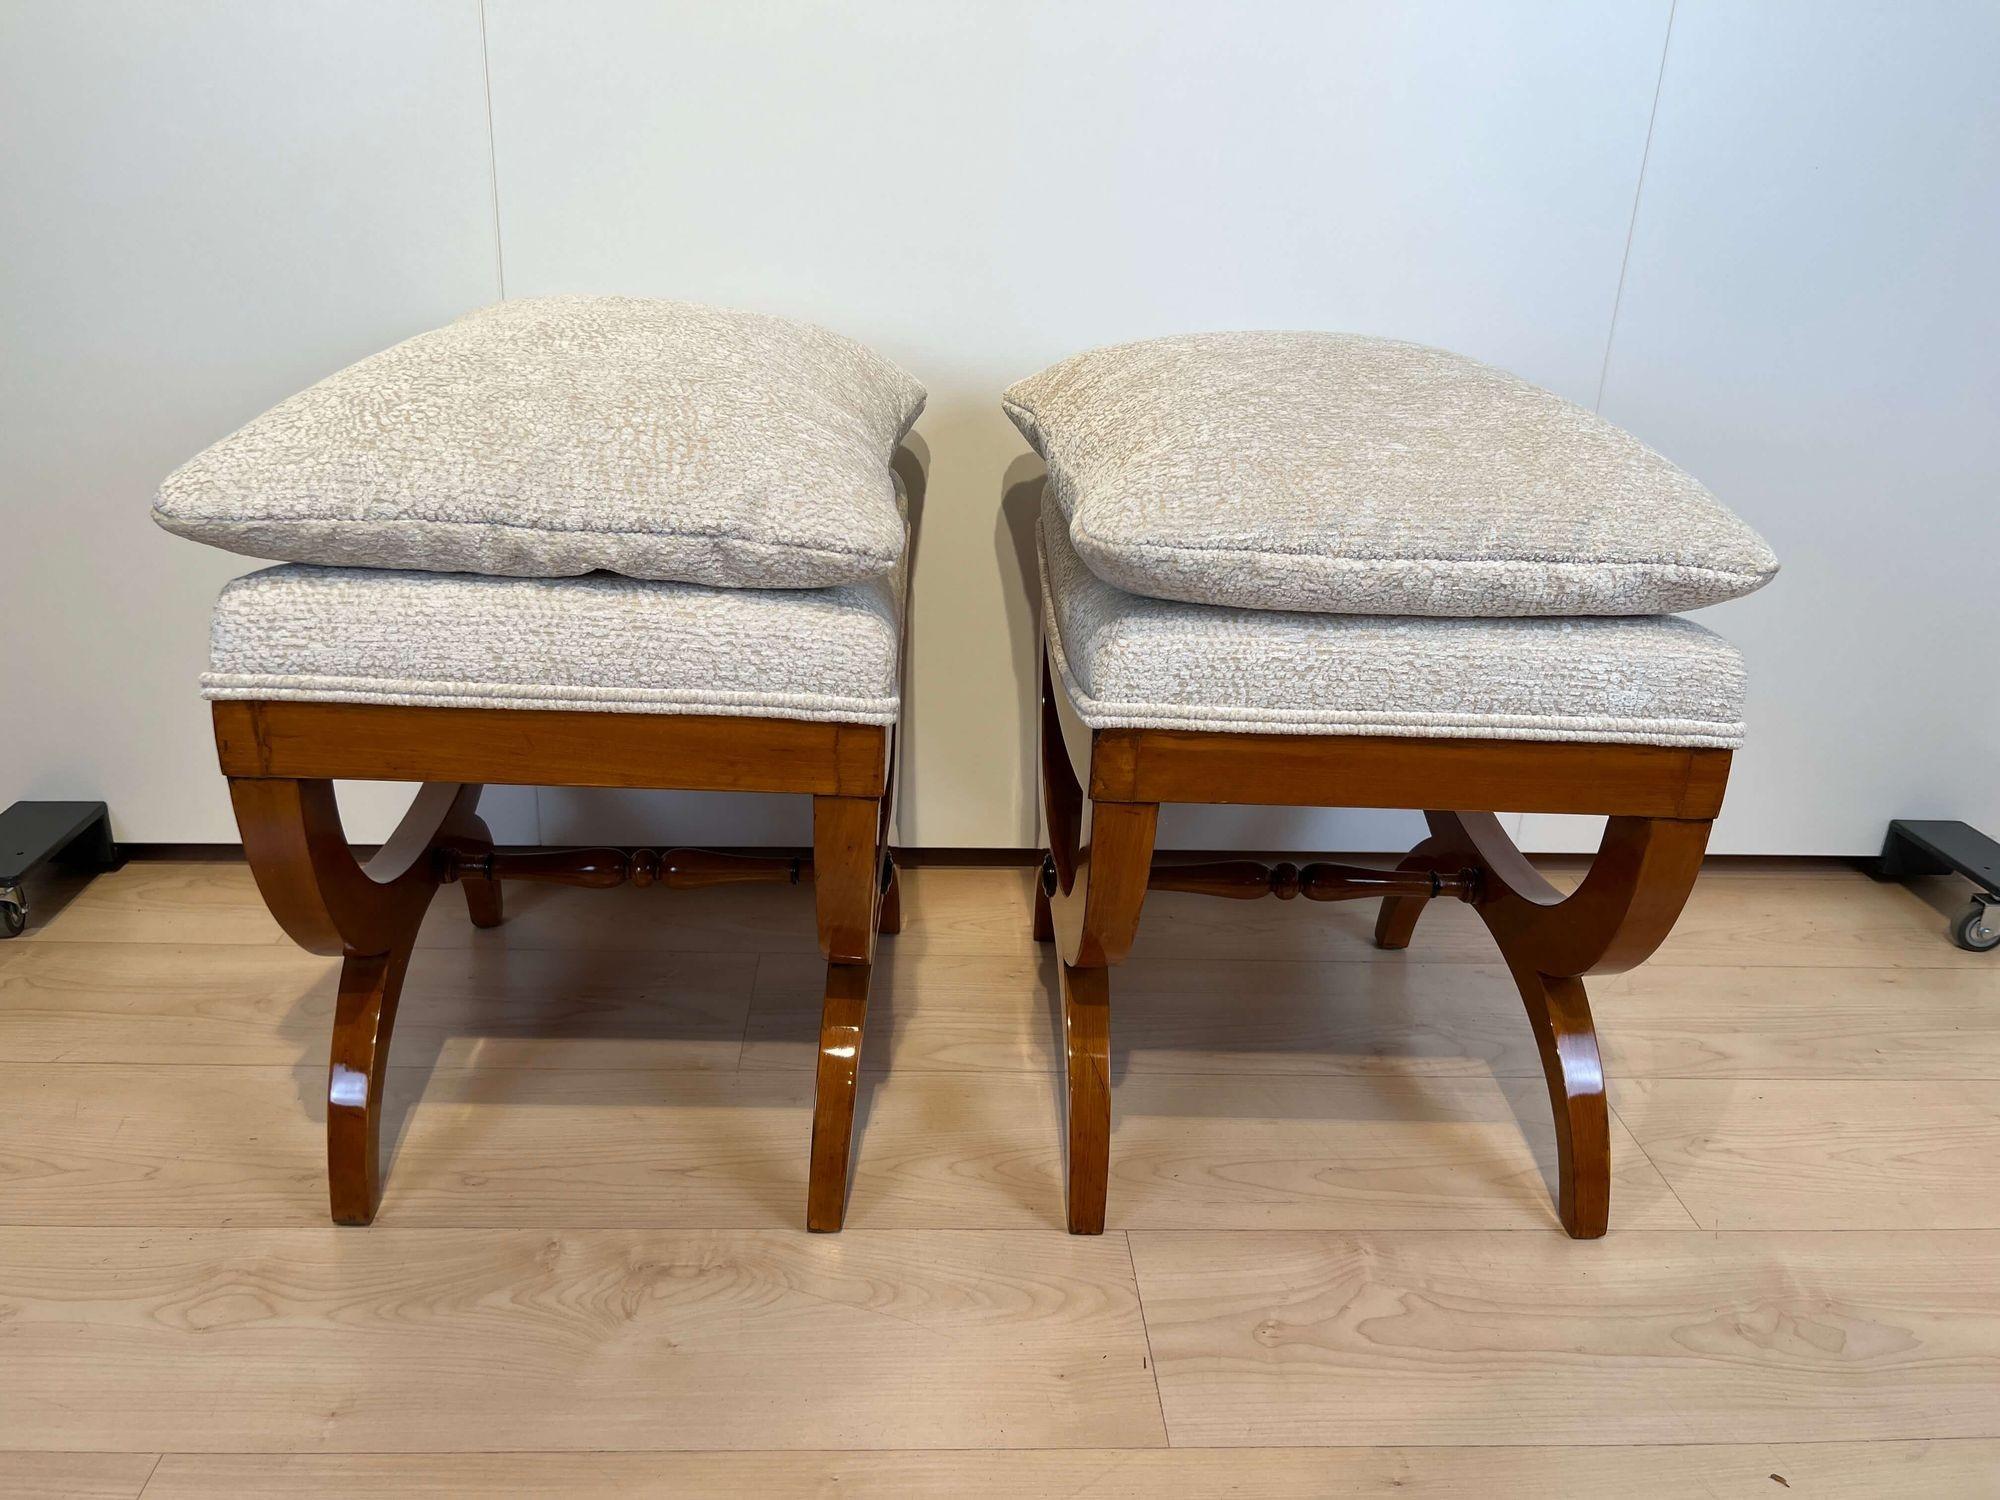 Mid-19th Century Pair of Large Tabourets, Beech Wood, France, circa 1860 For Sale